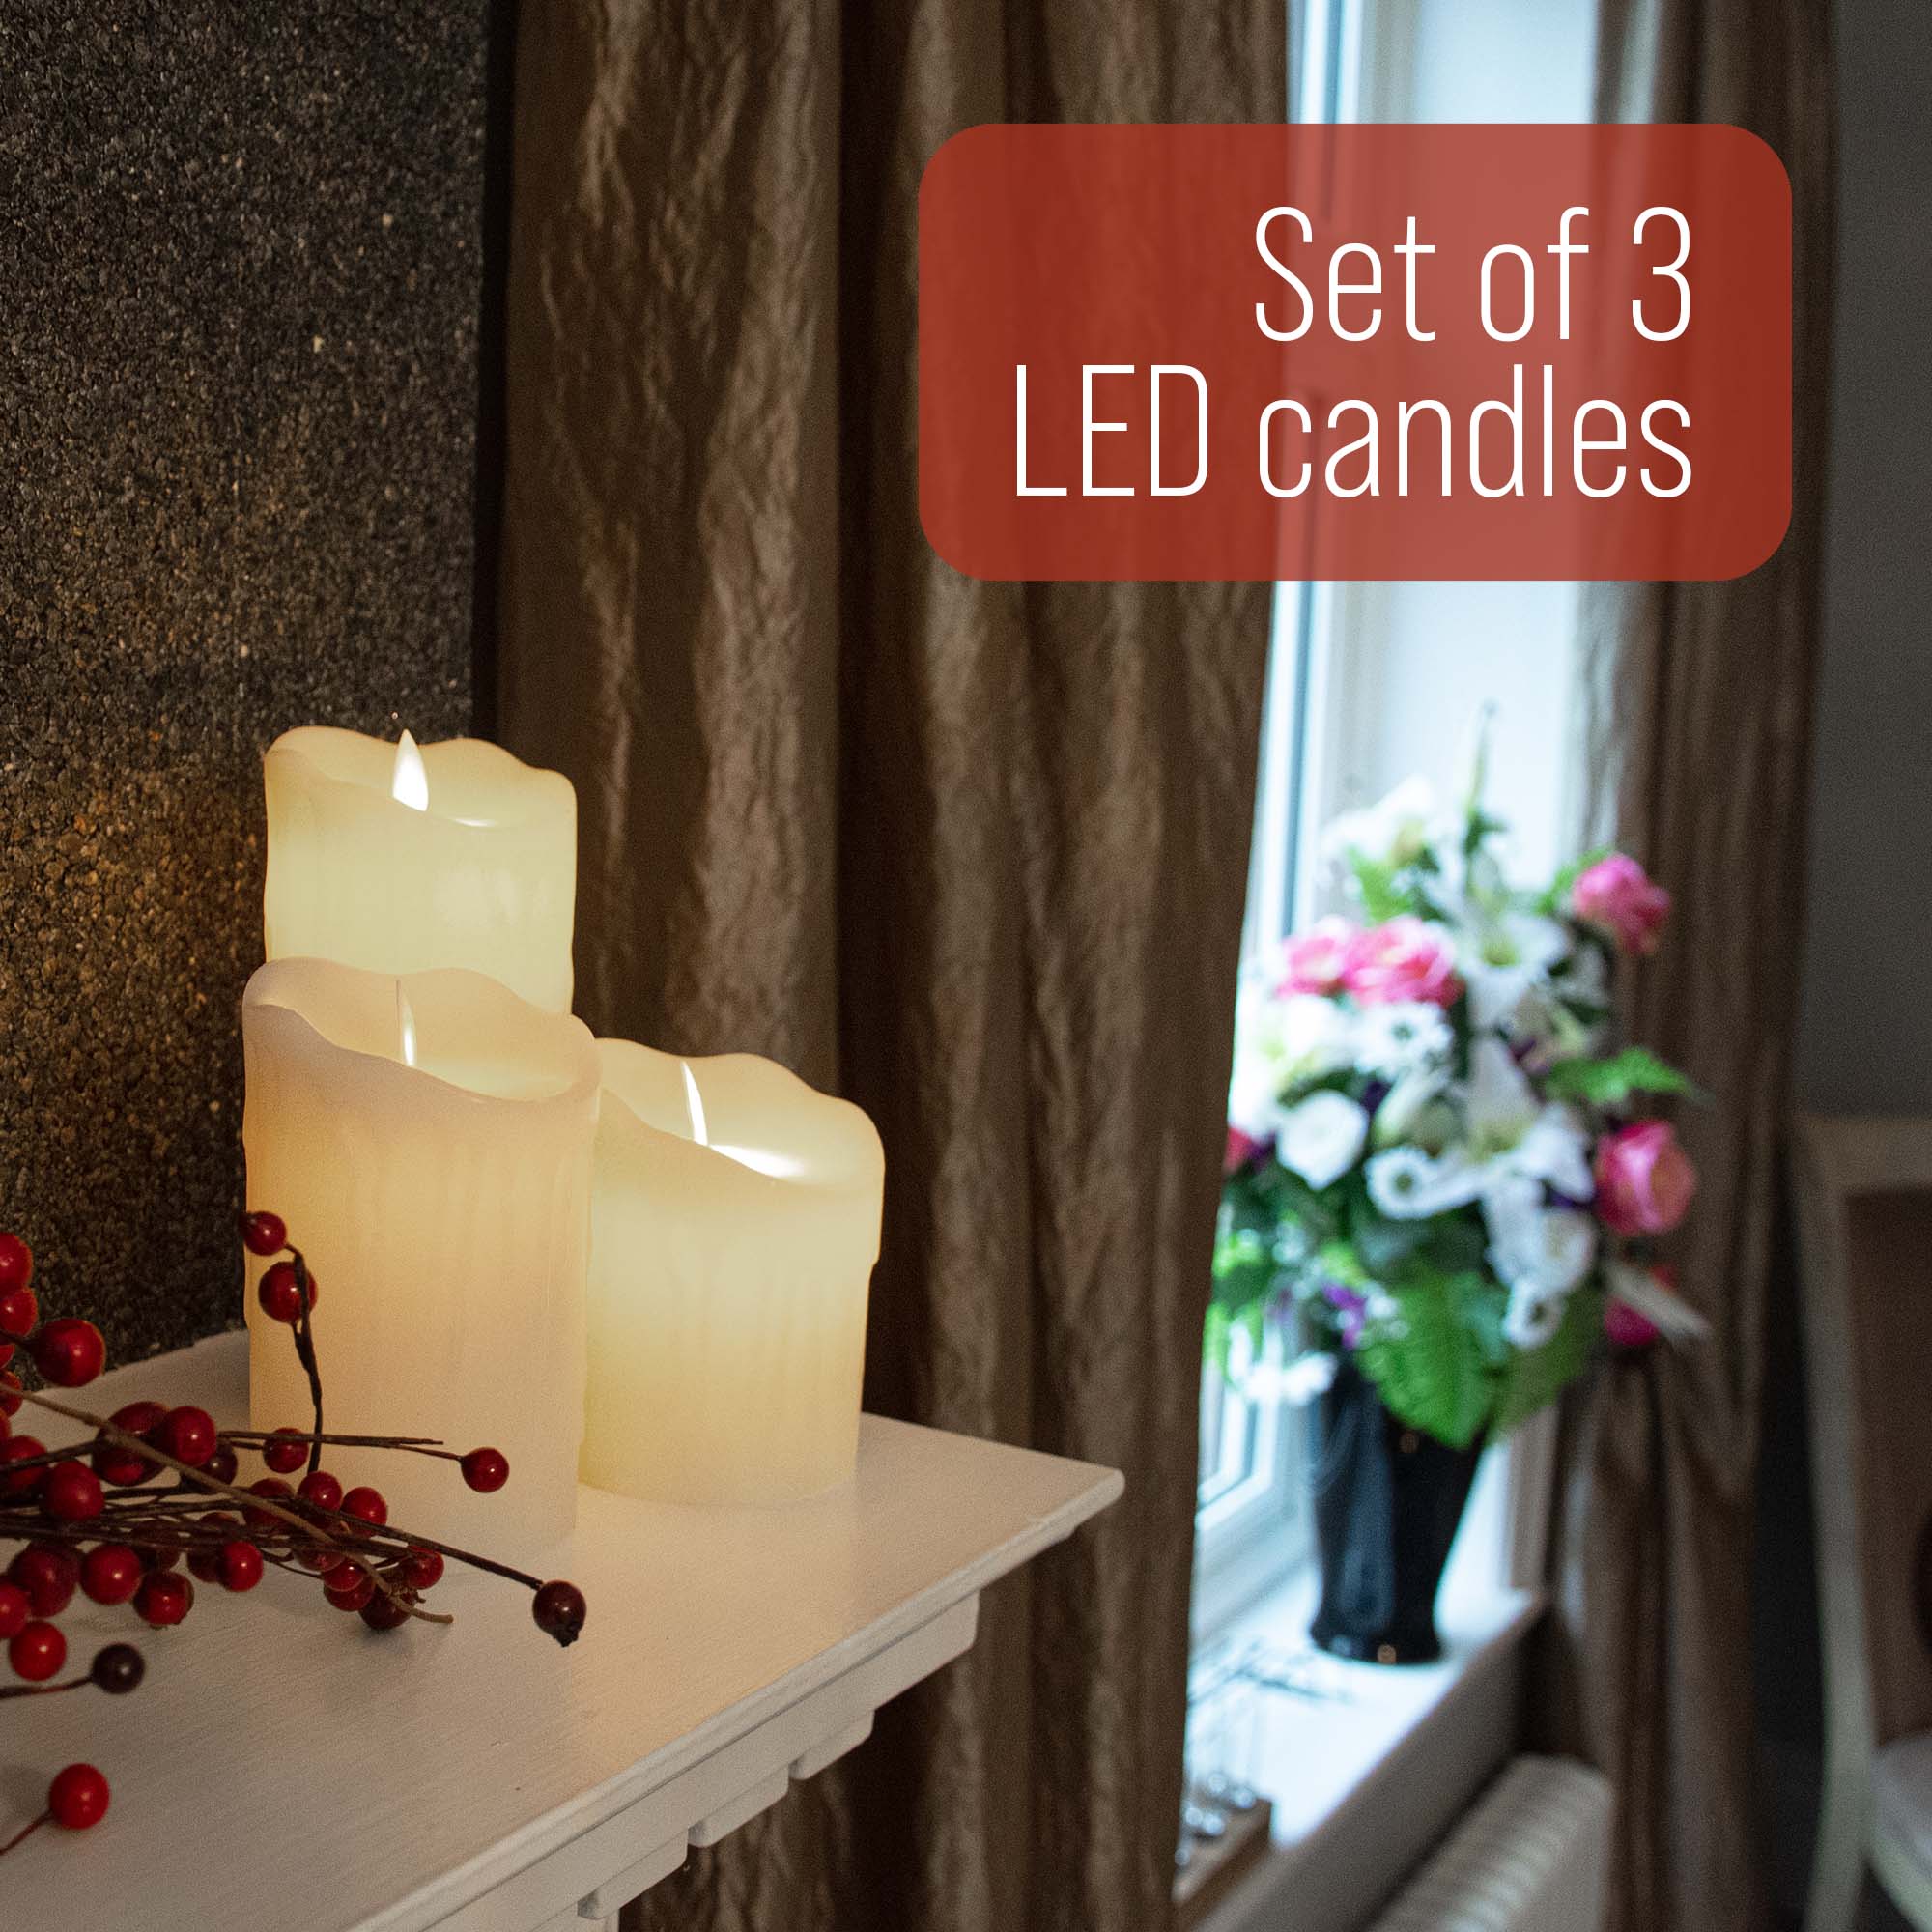 LED Flickering Candle Set (Wax Dripped) with remote control - DSL